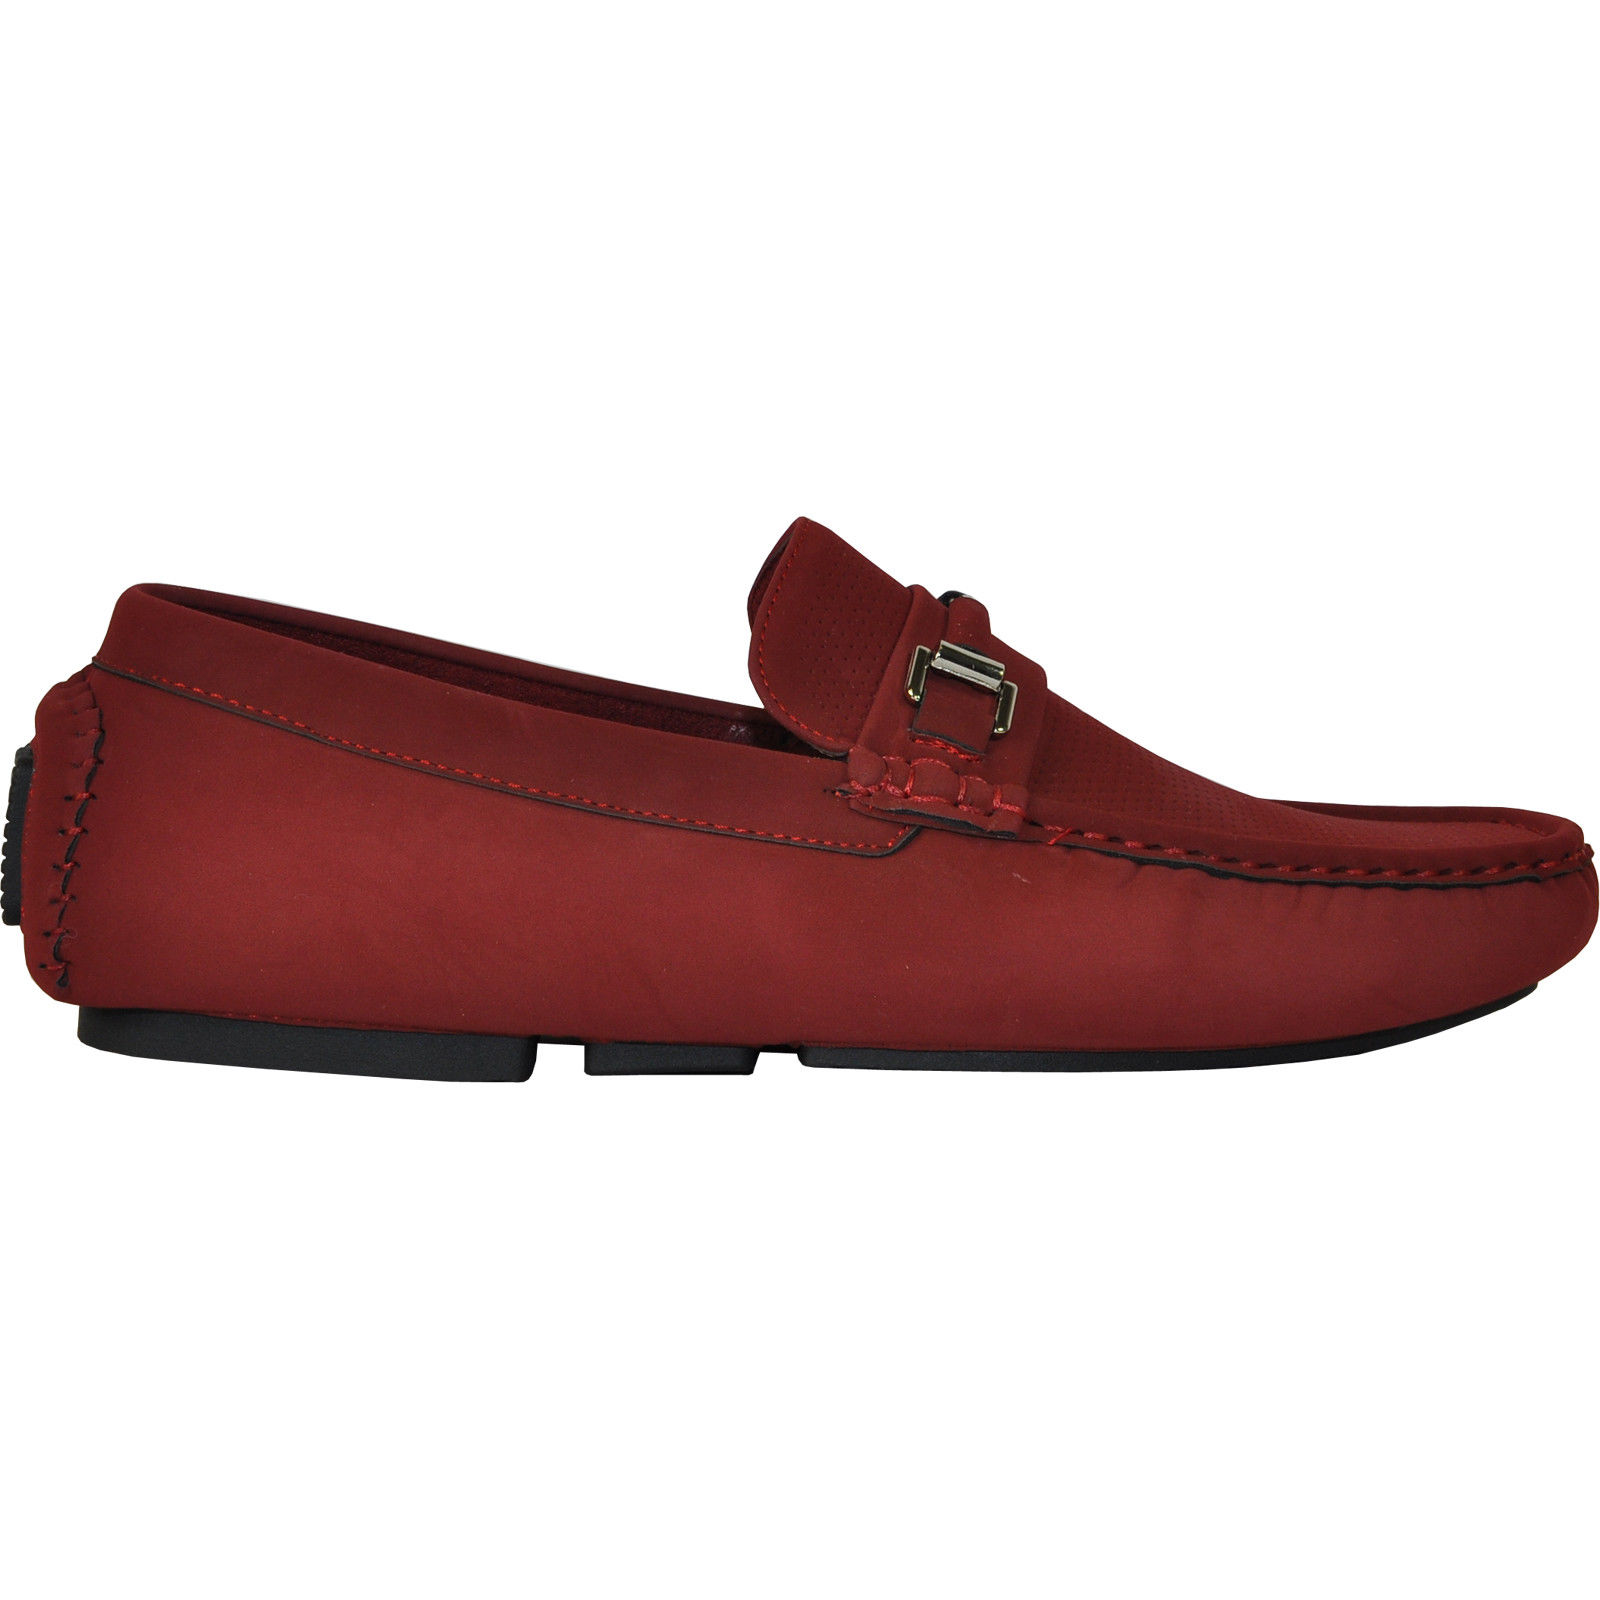 Bravo! Men Casual Shoe Todd-1 Driving Moccasin Red 14M US - image 4 of 7